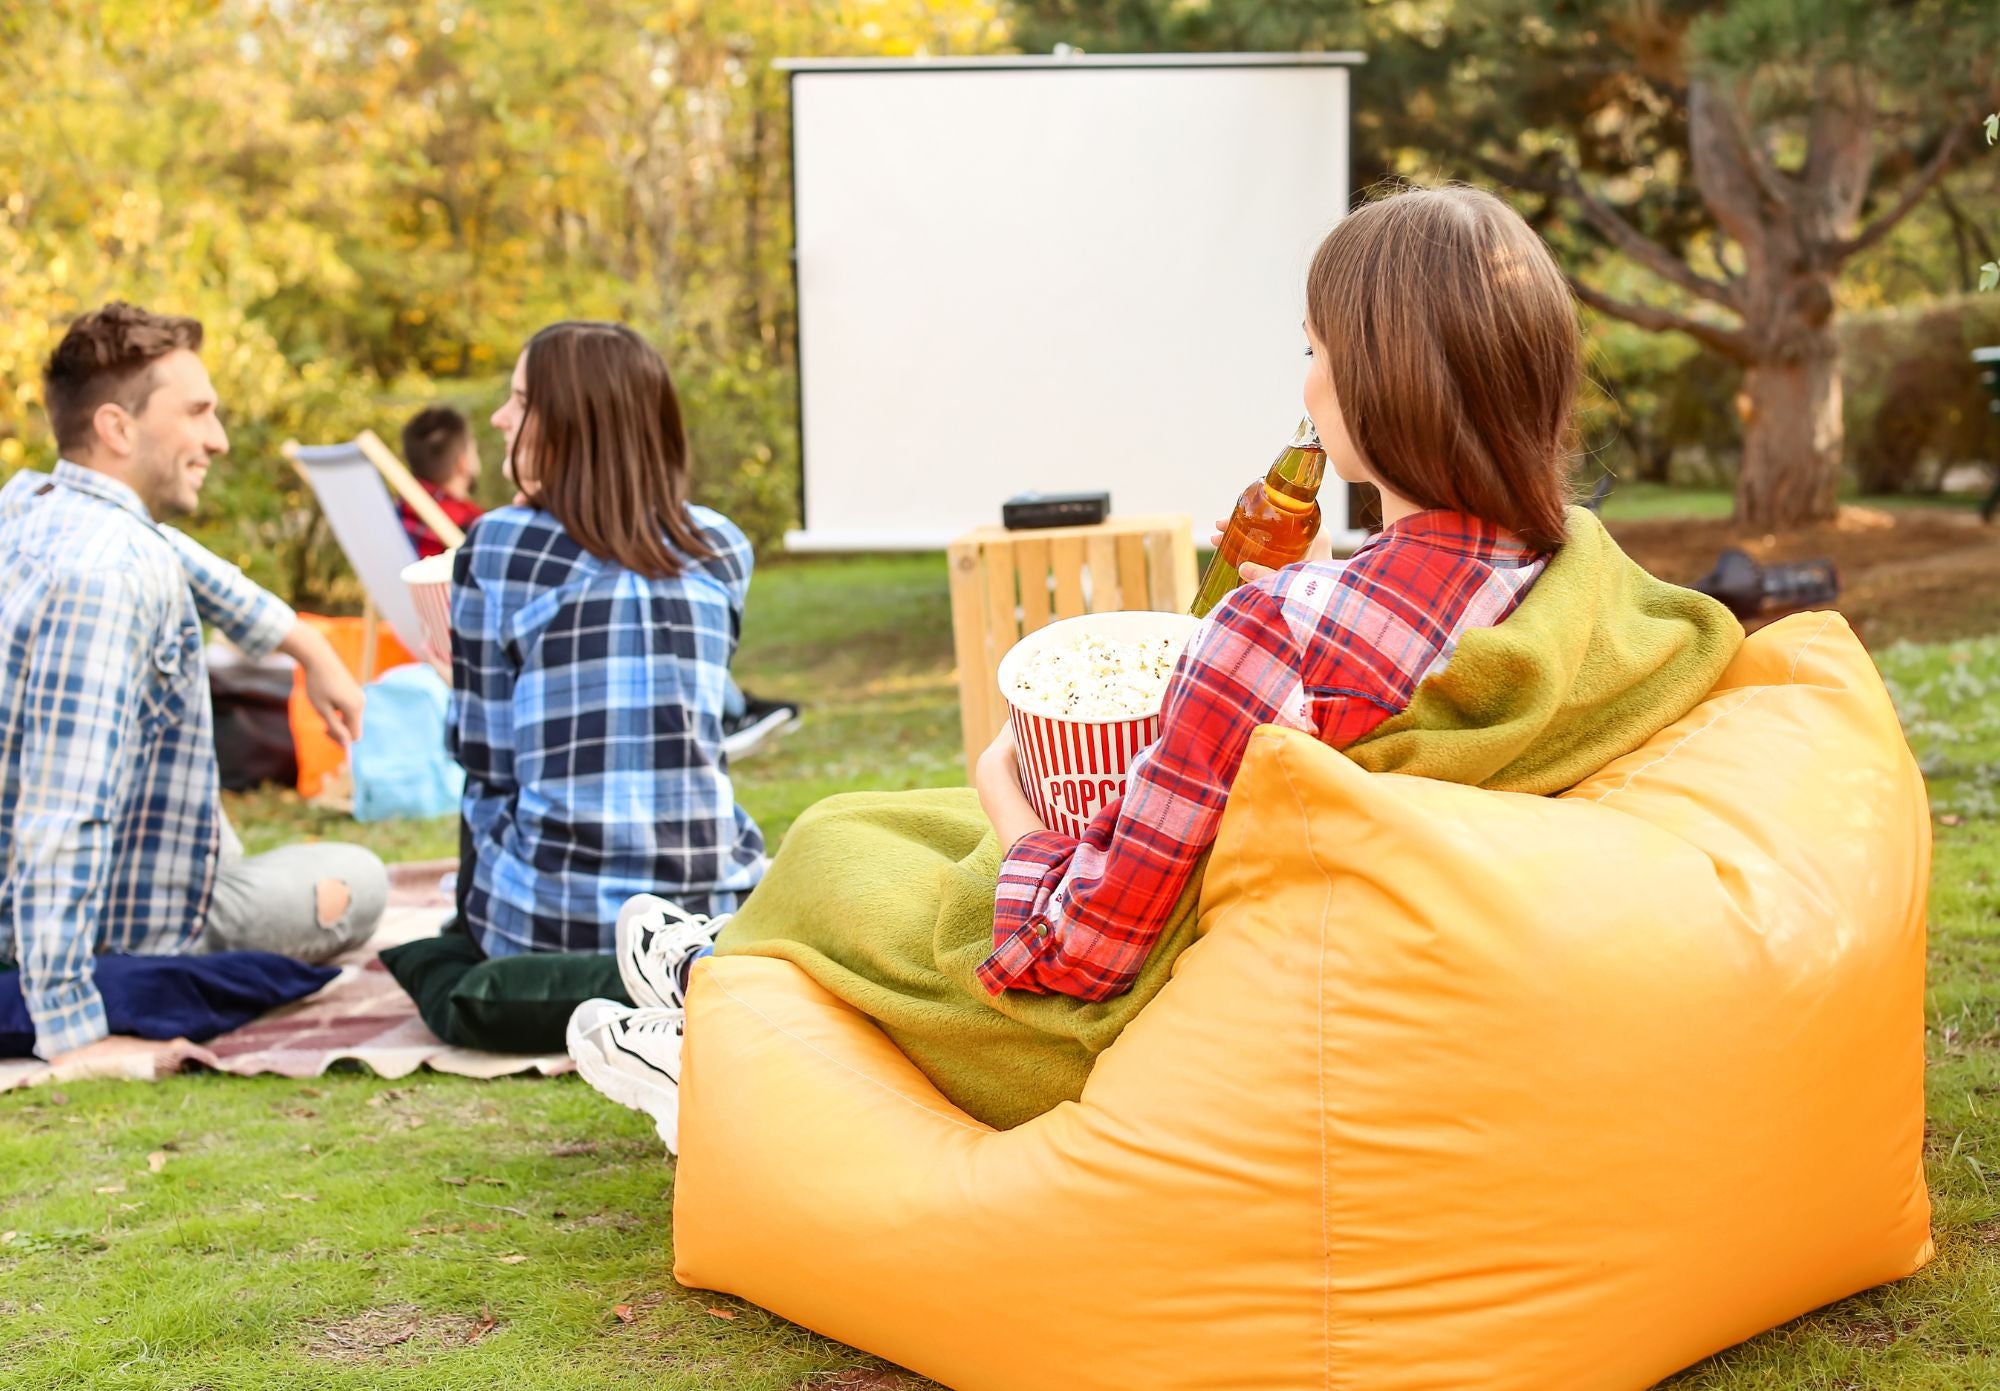 Summer Movie Nights: Creating a Cozy Outdoor Cinema Experience for Your Family